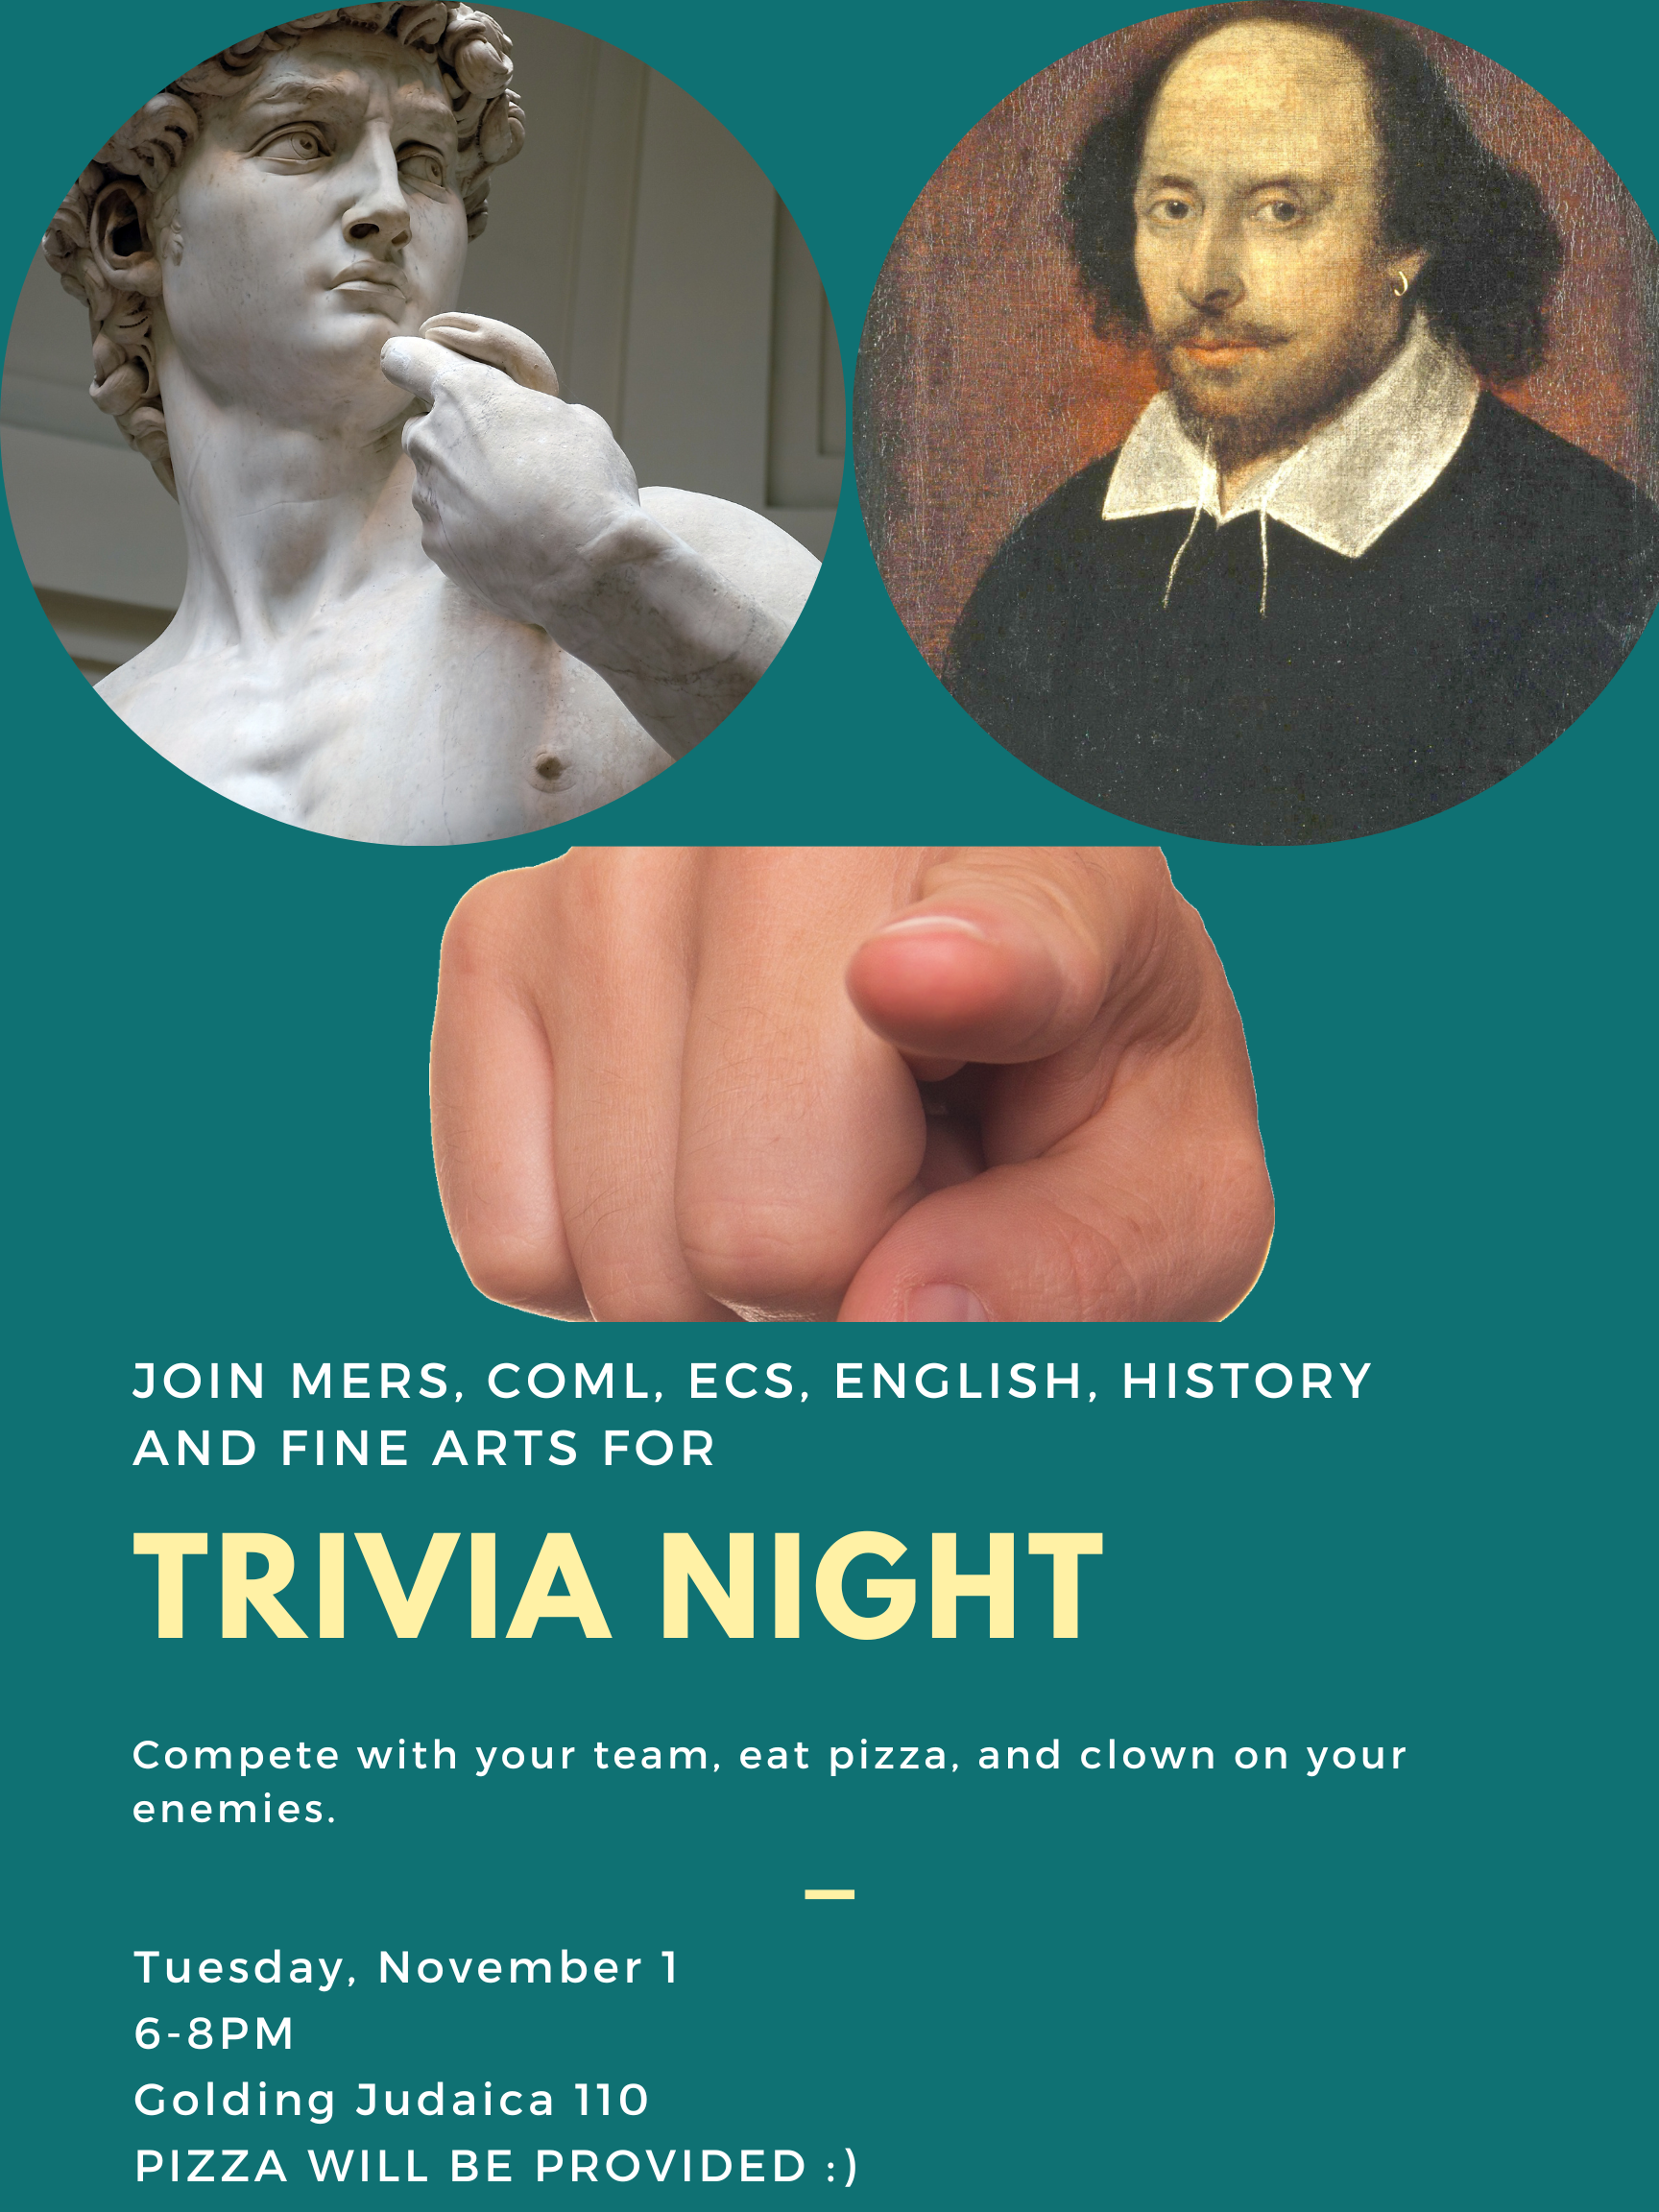 poster for trivia night. images of shakespeare, the david statue, and finger pointing towards viewer.text reads same as on this page.